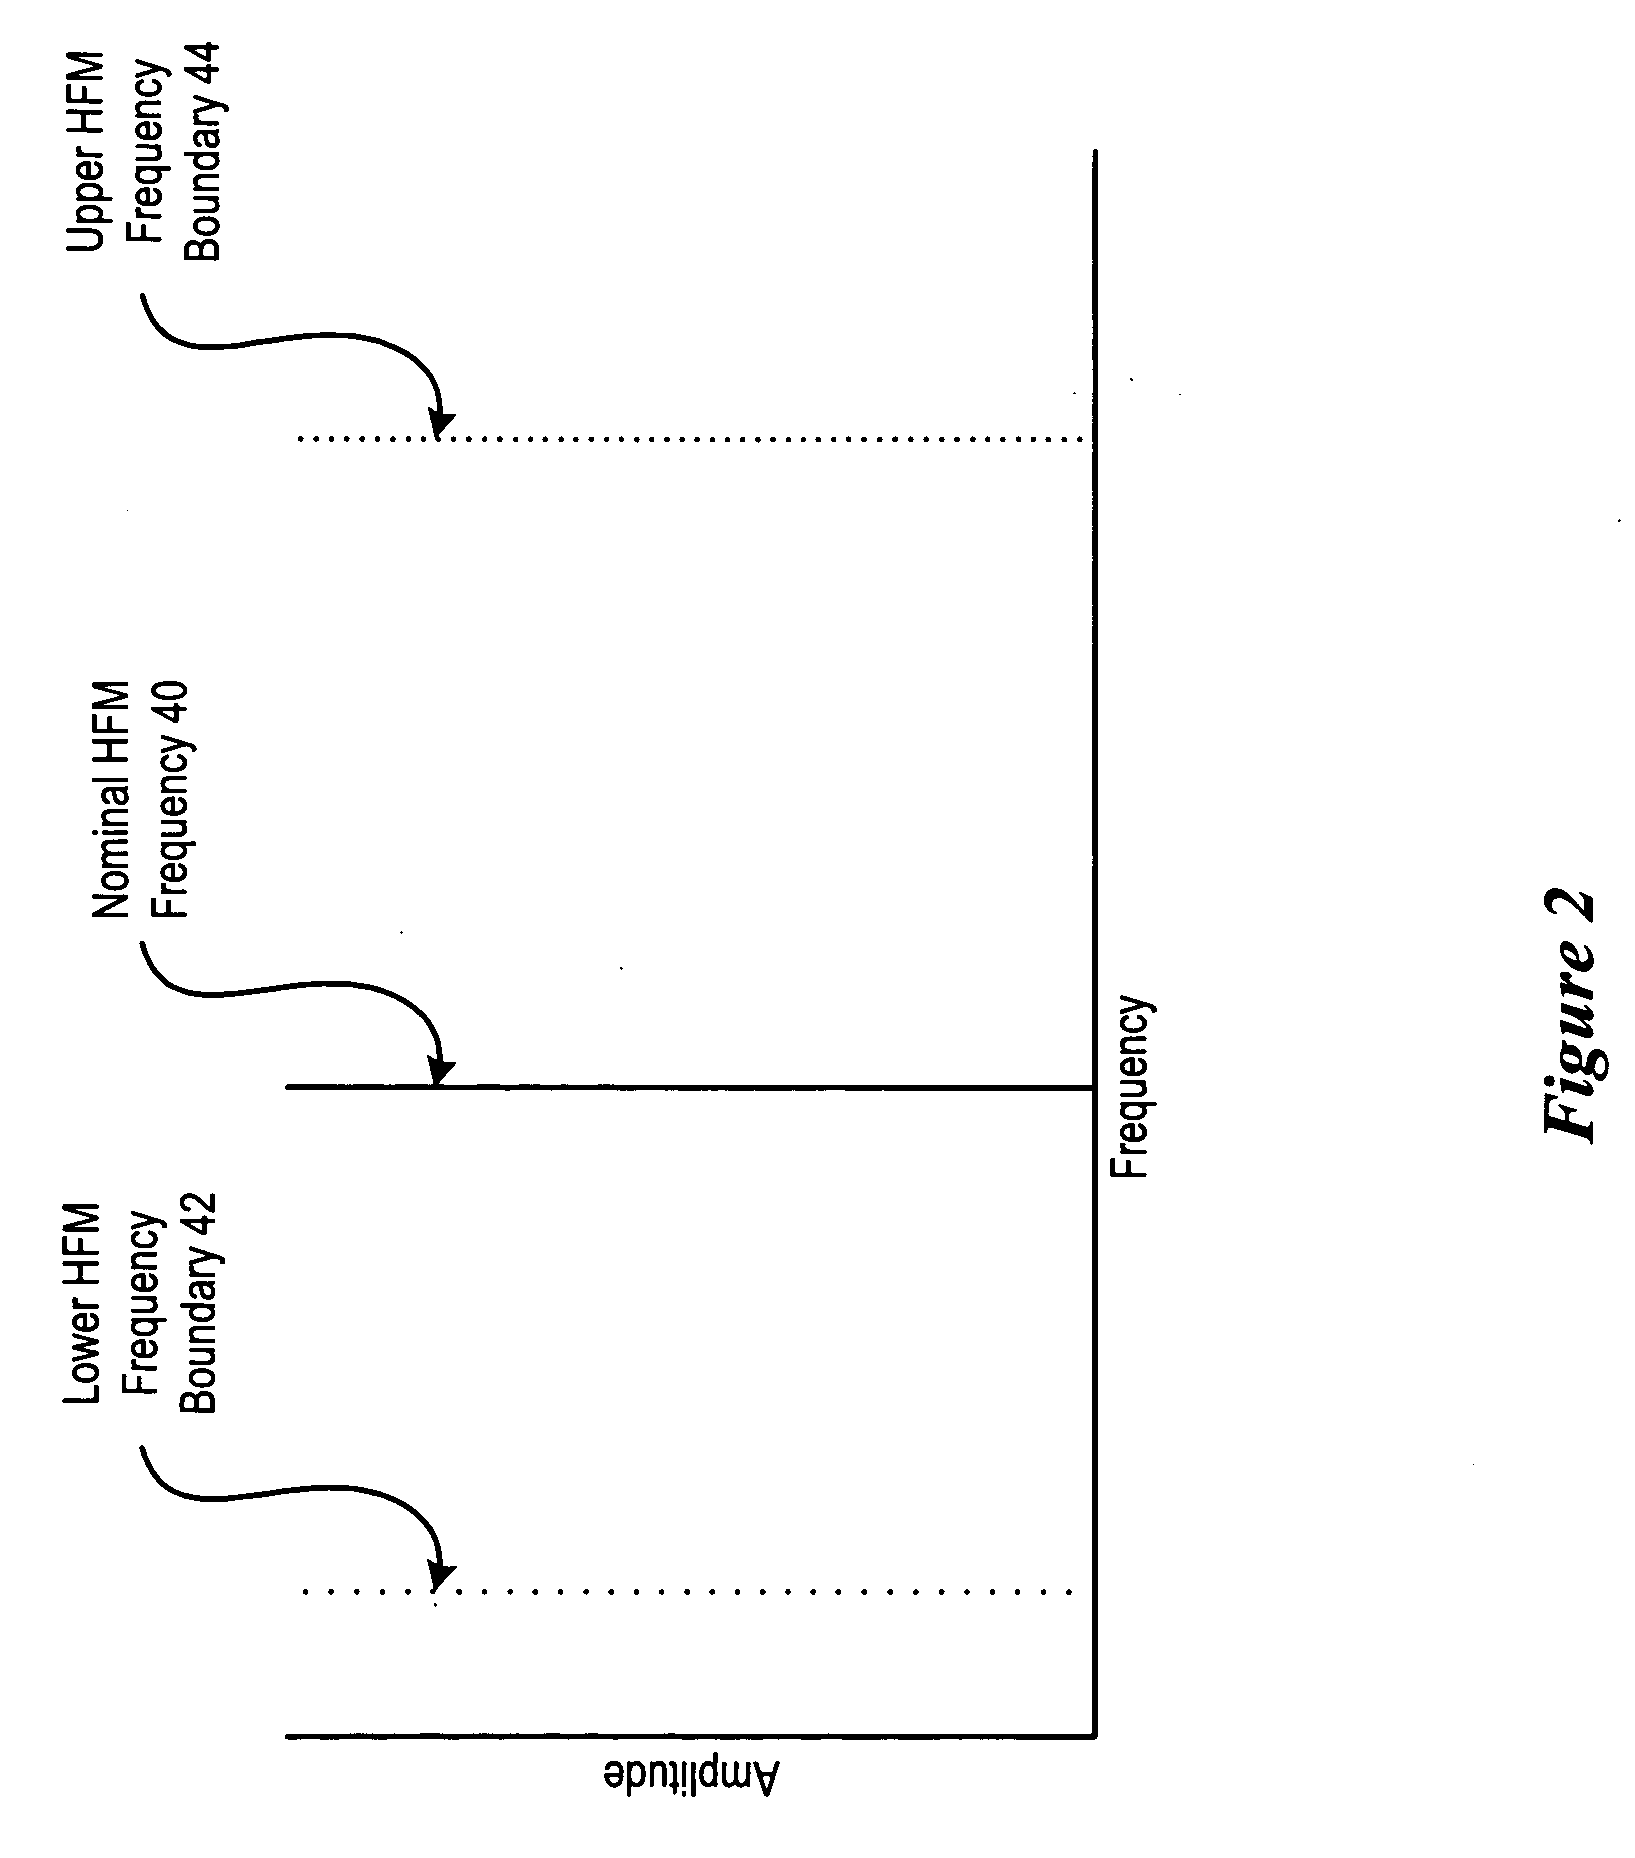 System and method for reducing RF emissions associated with an optical drive laser diode HFM signal